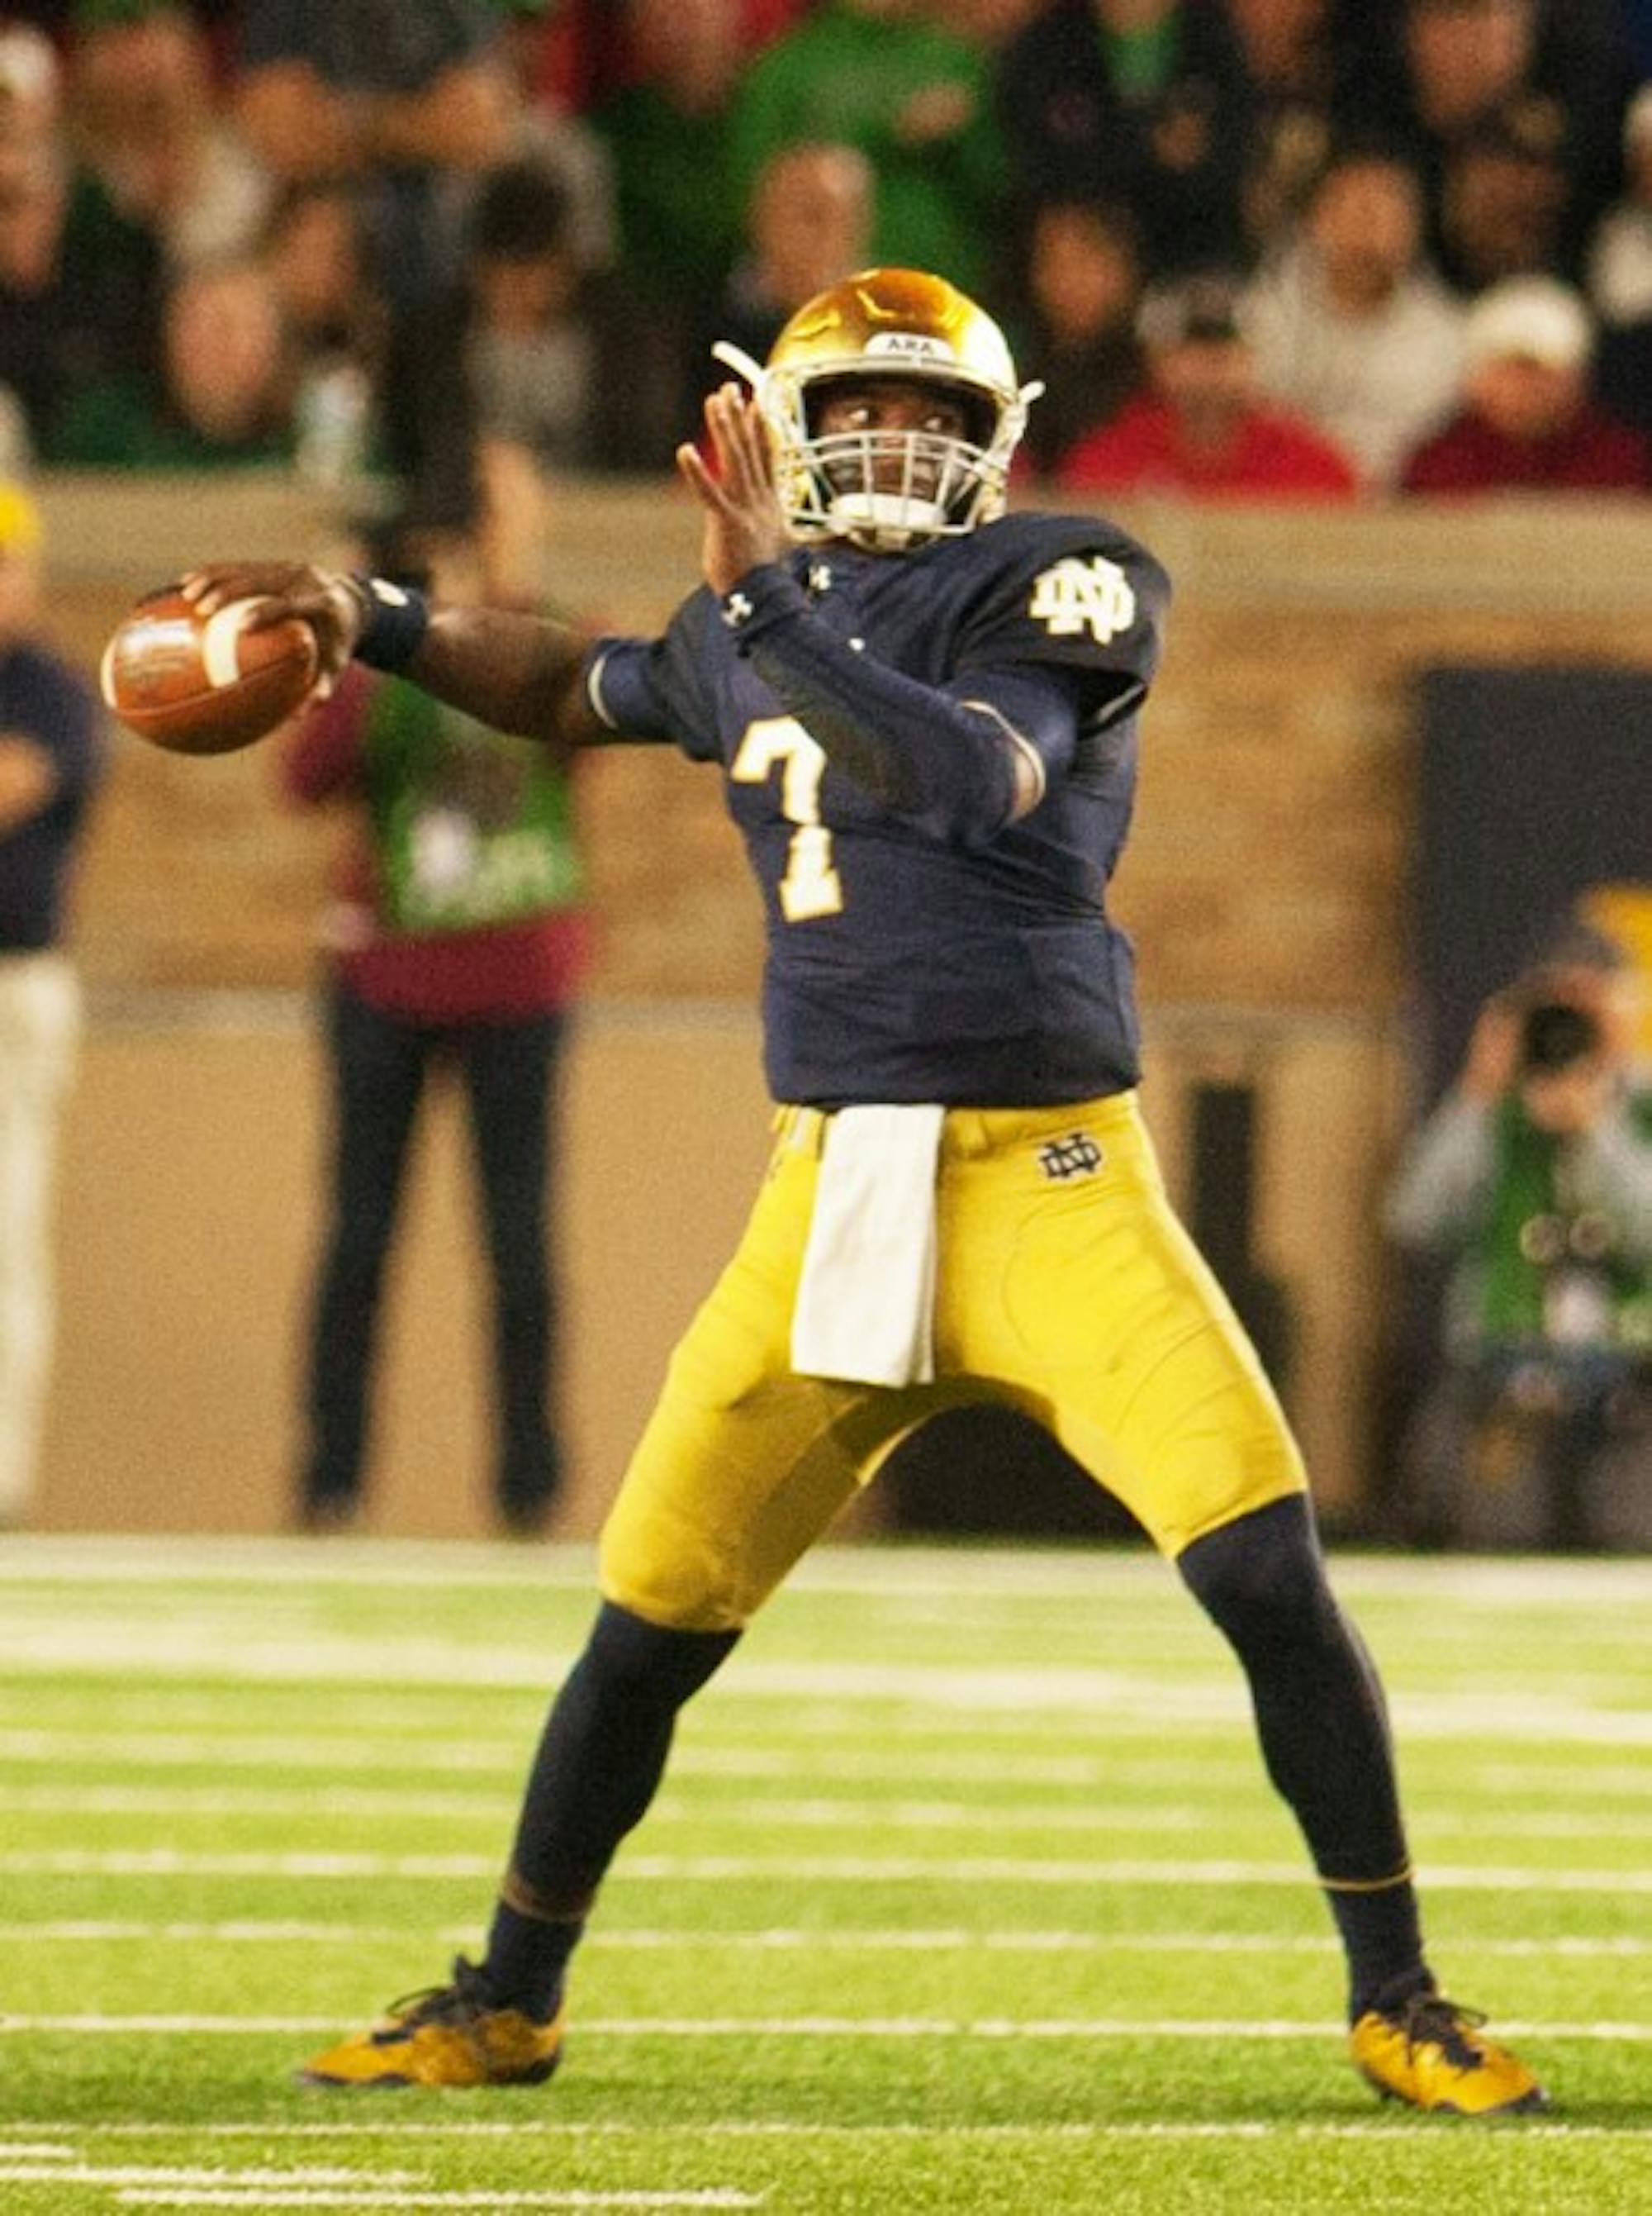 Irish junior quarterback Brandon Wimbush winds up for a pass during Notre Dame’s 20-19 loss to Georgia on Saturday at Notre Dame Stadium. Wimbush completed 20 passes for 210 yards in the game.